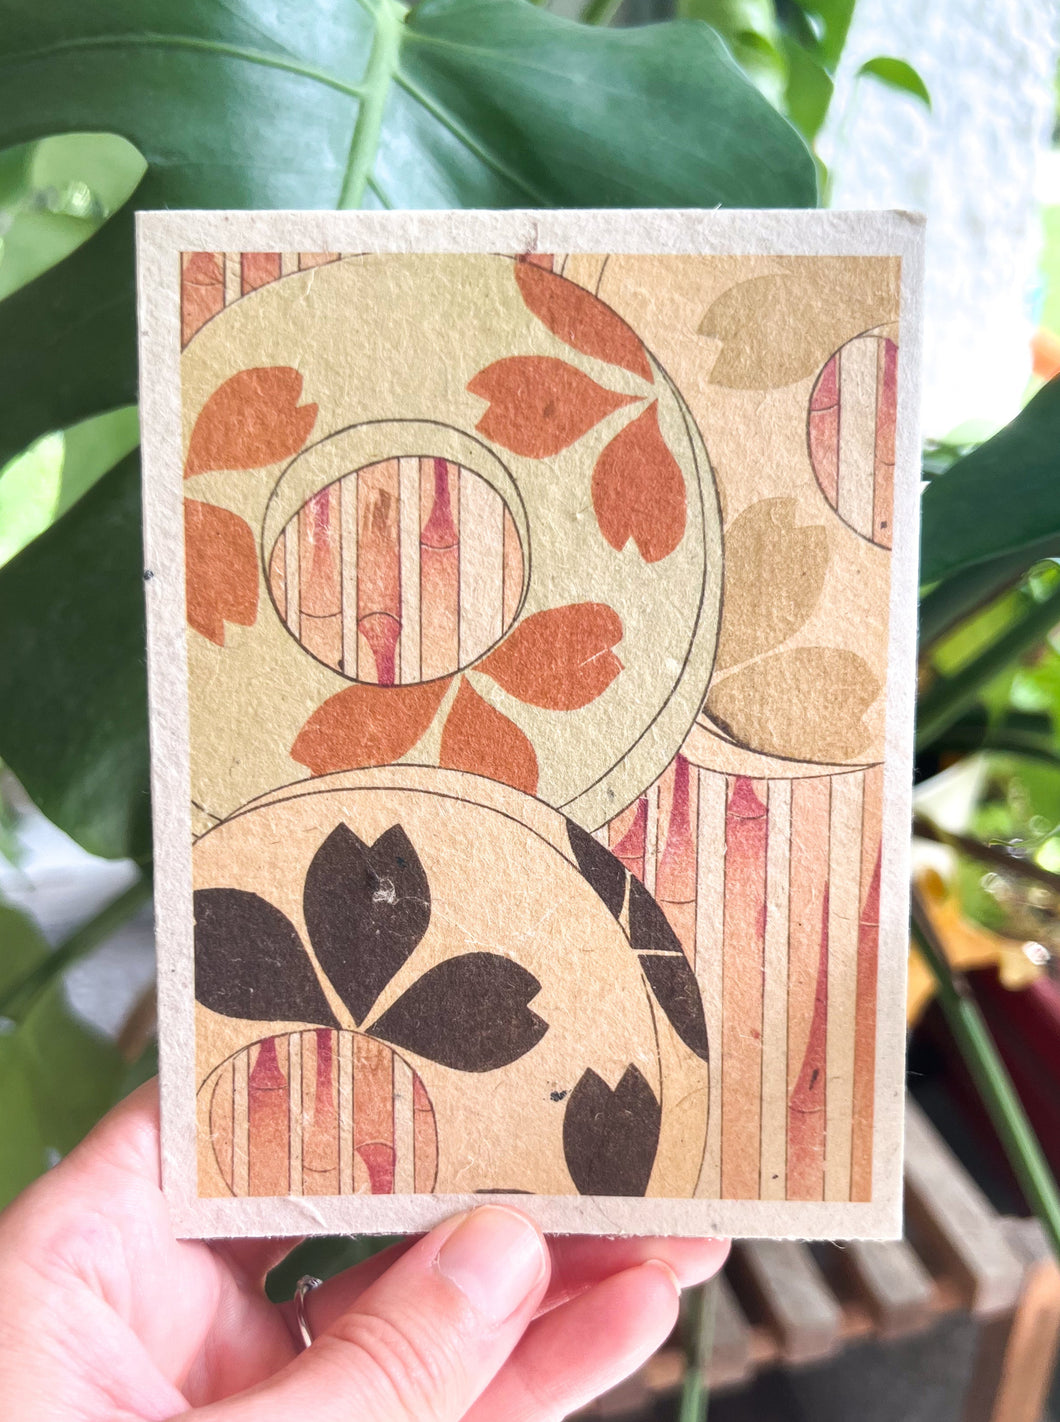 Japanese Plantable Seed Card || Zero Waste || Supports Women || Eco-friendly || J44